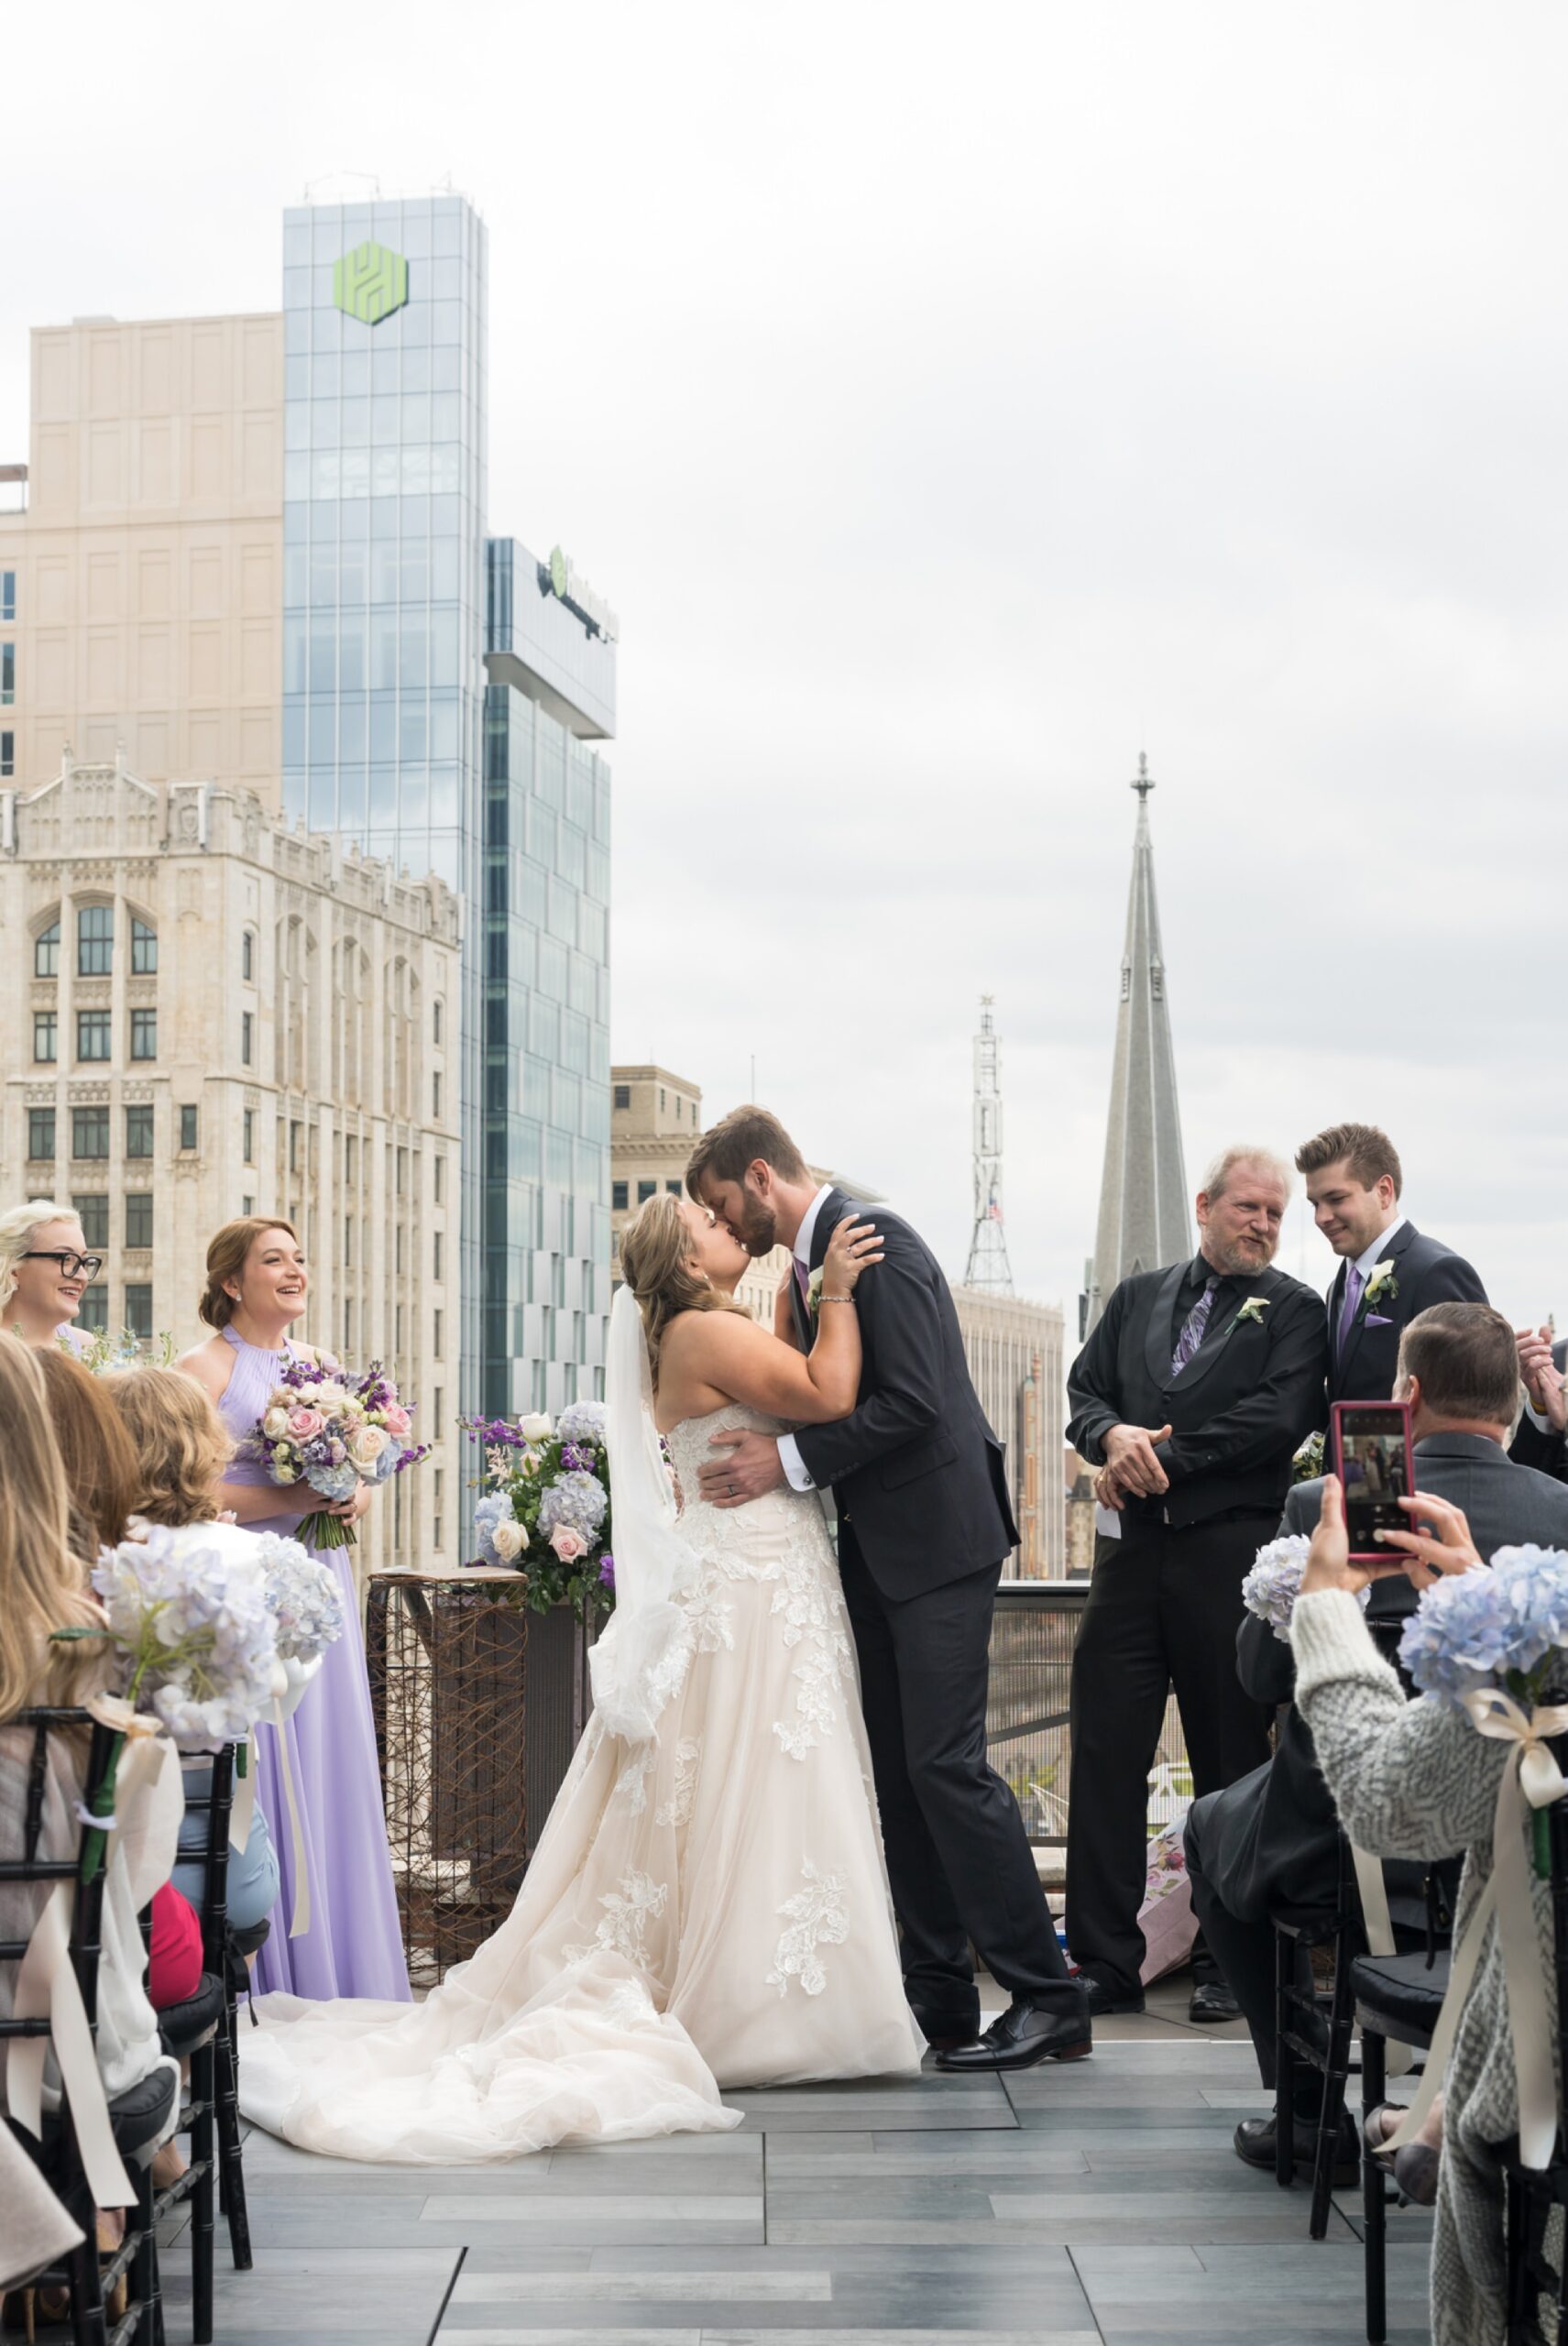 Bride and groom share a first kiss at their Madison Building wedding.